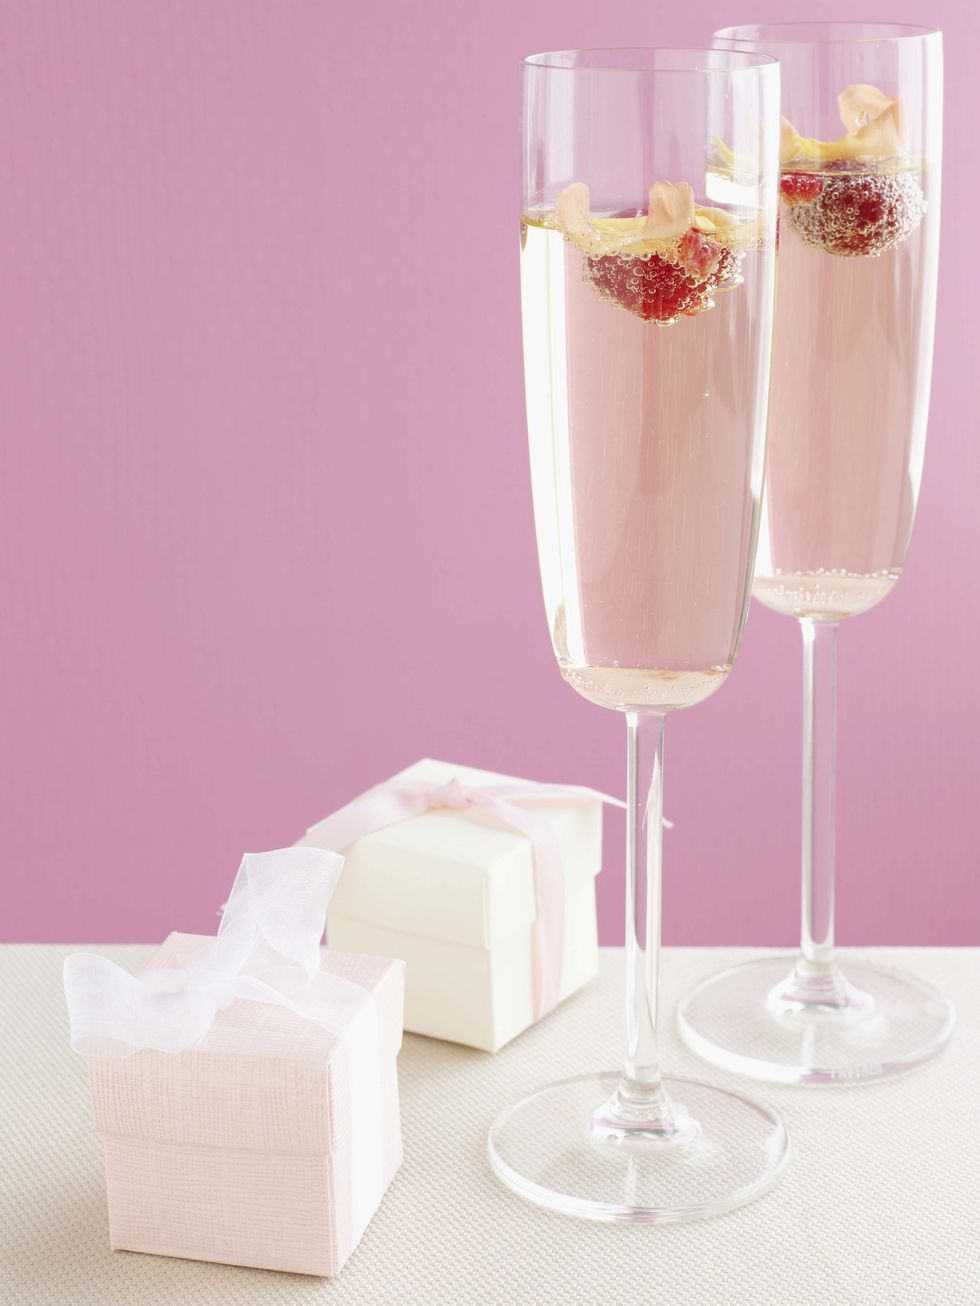 <p>The <a href="http://somethingturquoise.com/2013/12/17/raspberry-champagne-cocktail-recipe/" target="_blank">perfect drink</a> for sipping at special events and weddings. </p><p><strong>Ingredients: </strong></p><p>Dry Sparkling Wine</p><p>Fresh Raspberries</p><p>1 Tblsp. Raspberry Liqueur<strong></strong></p><p><strong>Directions: </strong></p><p>Top off your champagne with a few raspberries and a tablespoon of raspberry liqueur, then serve. </p>